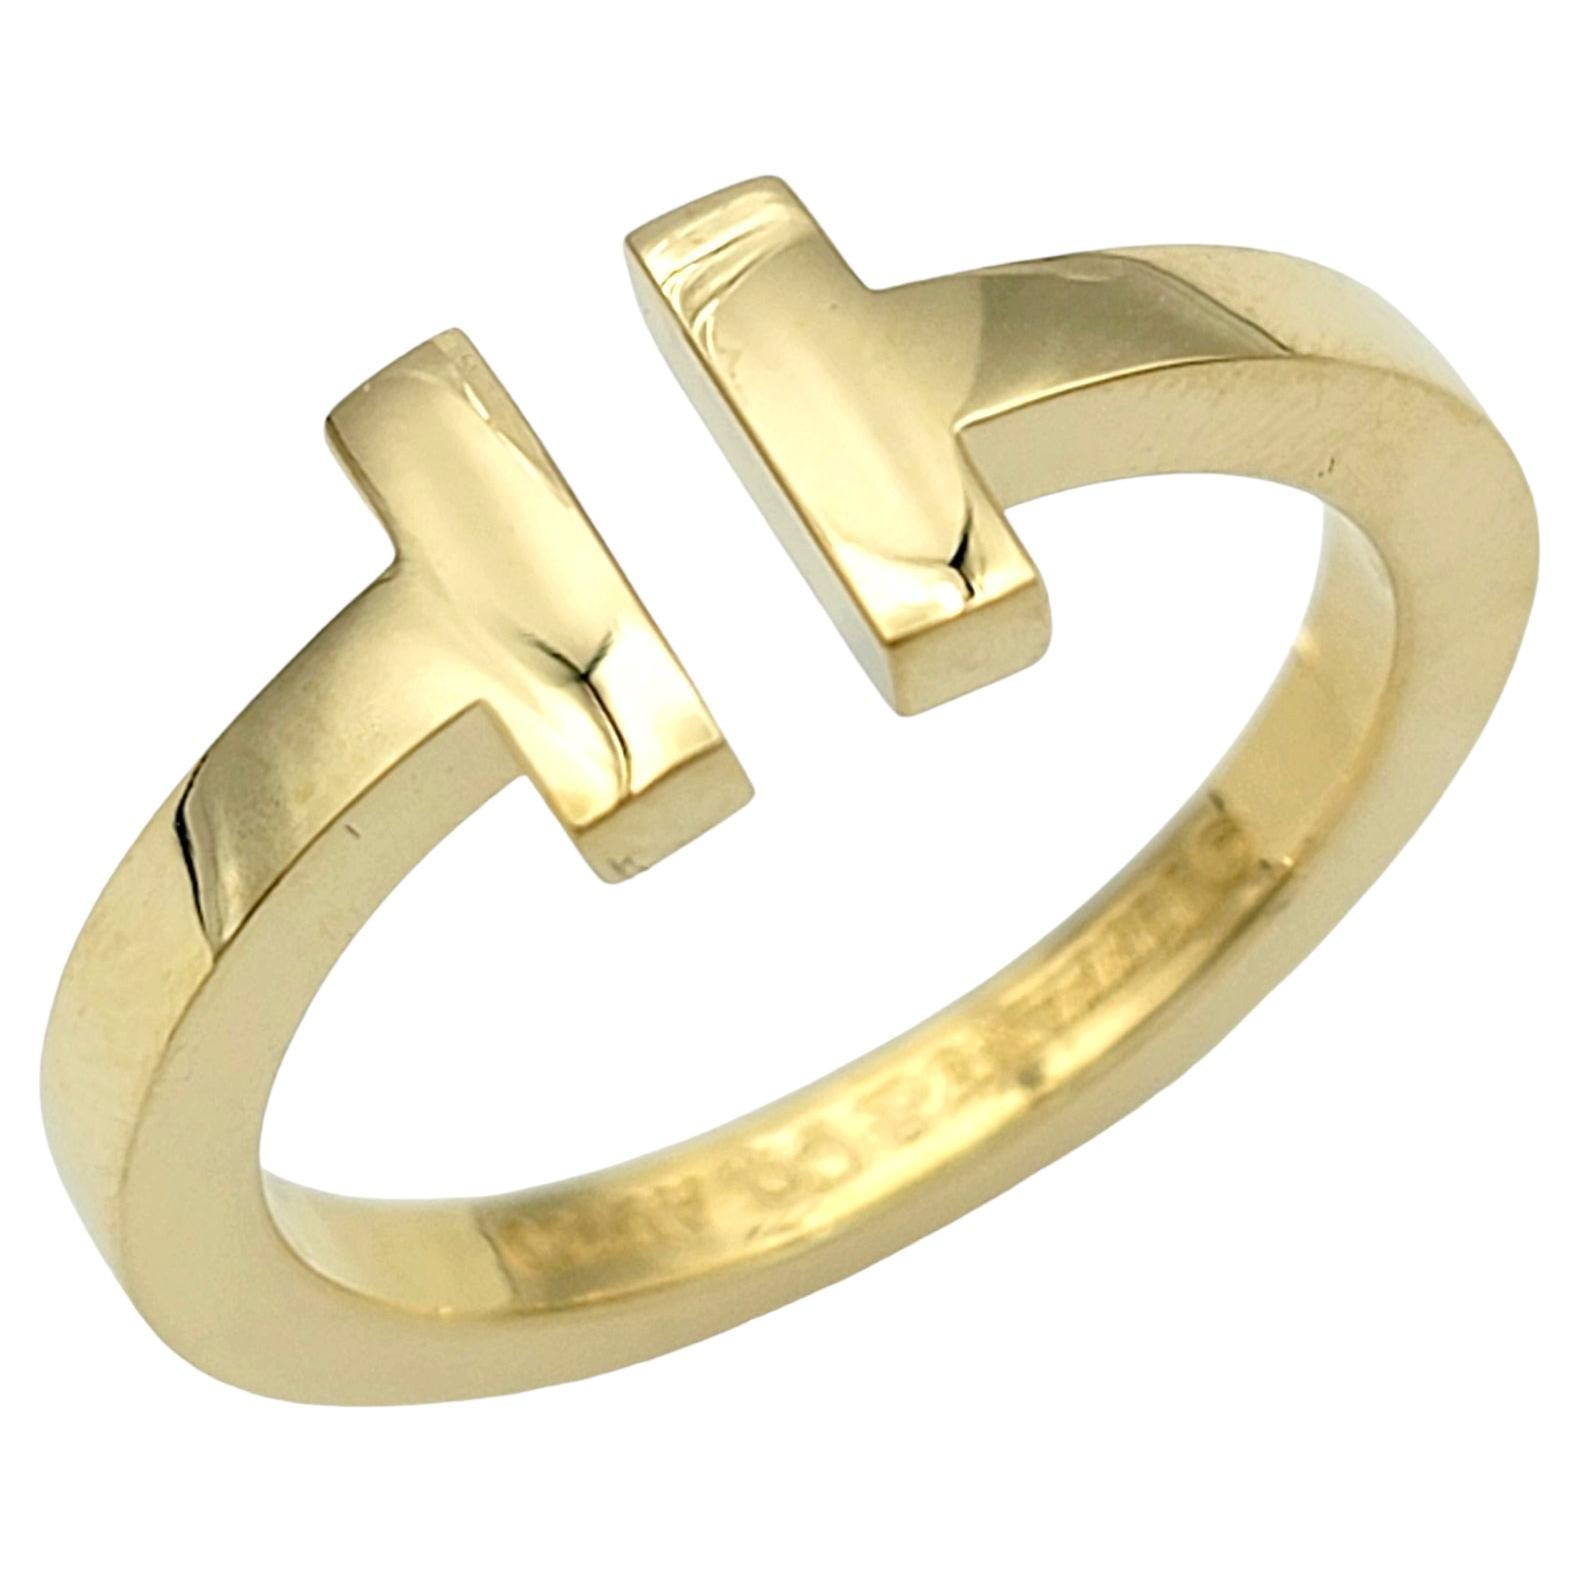 Tiffany & Co. Tiffany T Square High Polished Band Ring in 18 Karat Yellow Gold For Sale